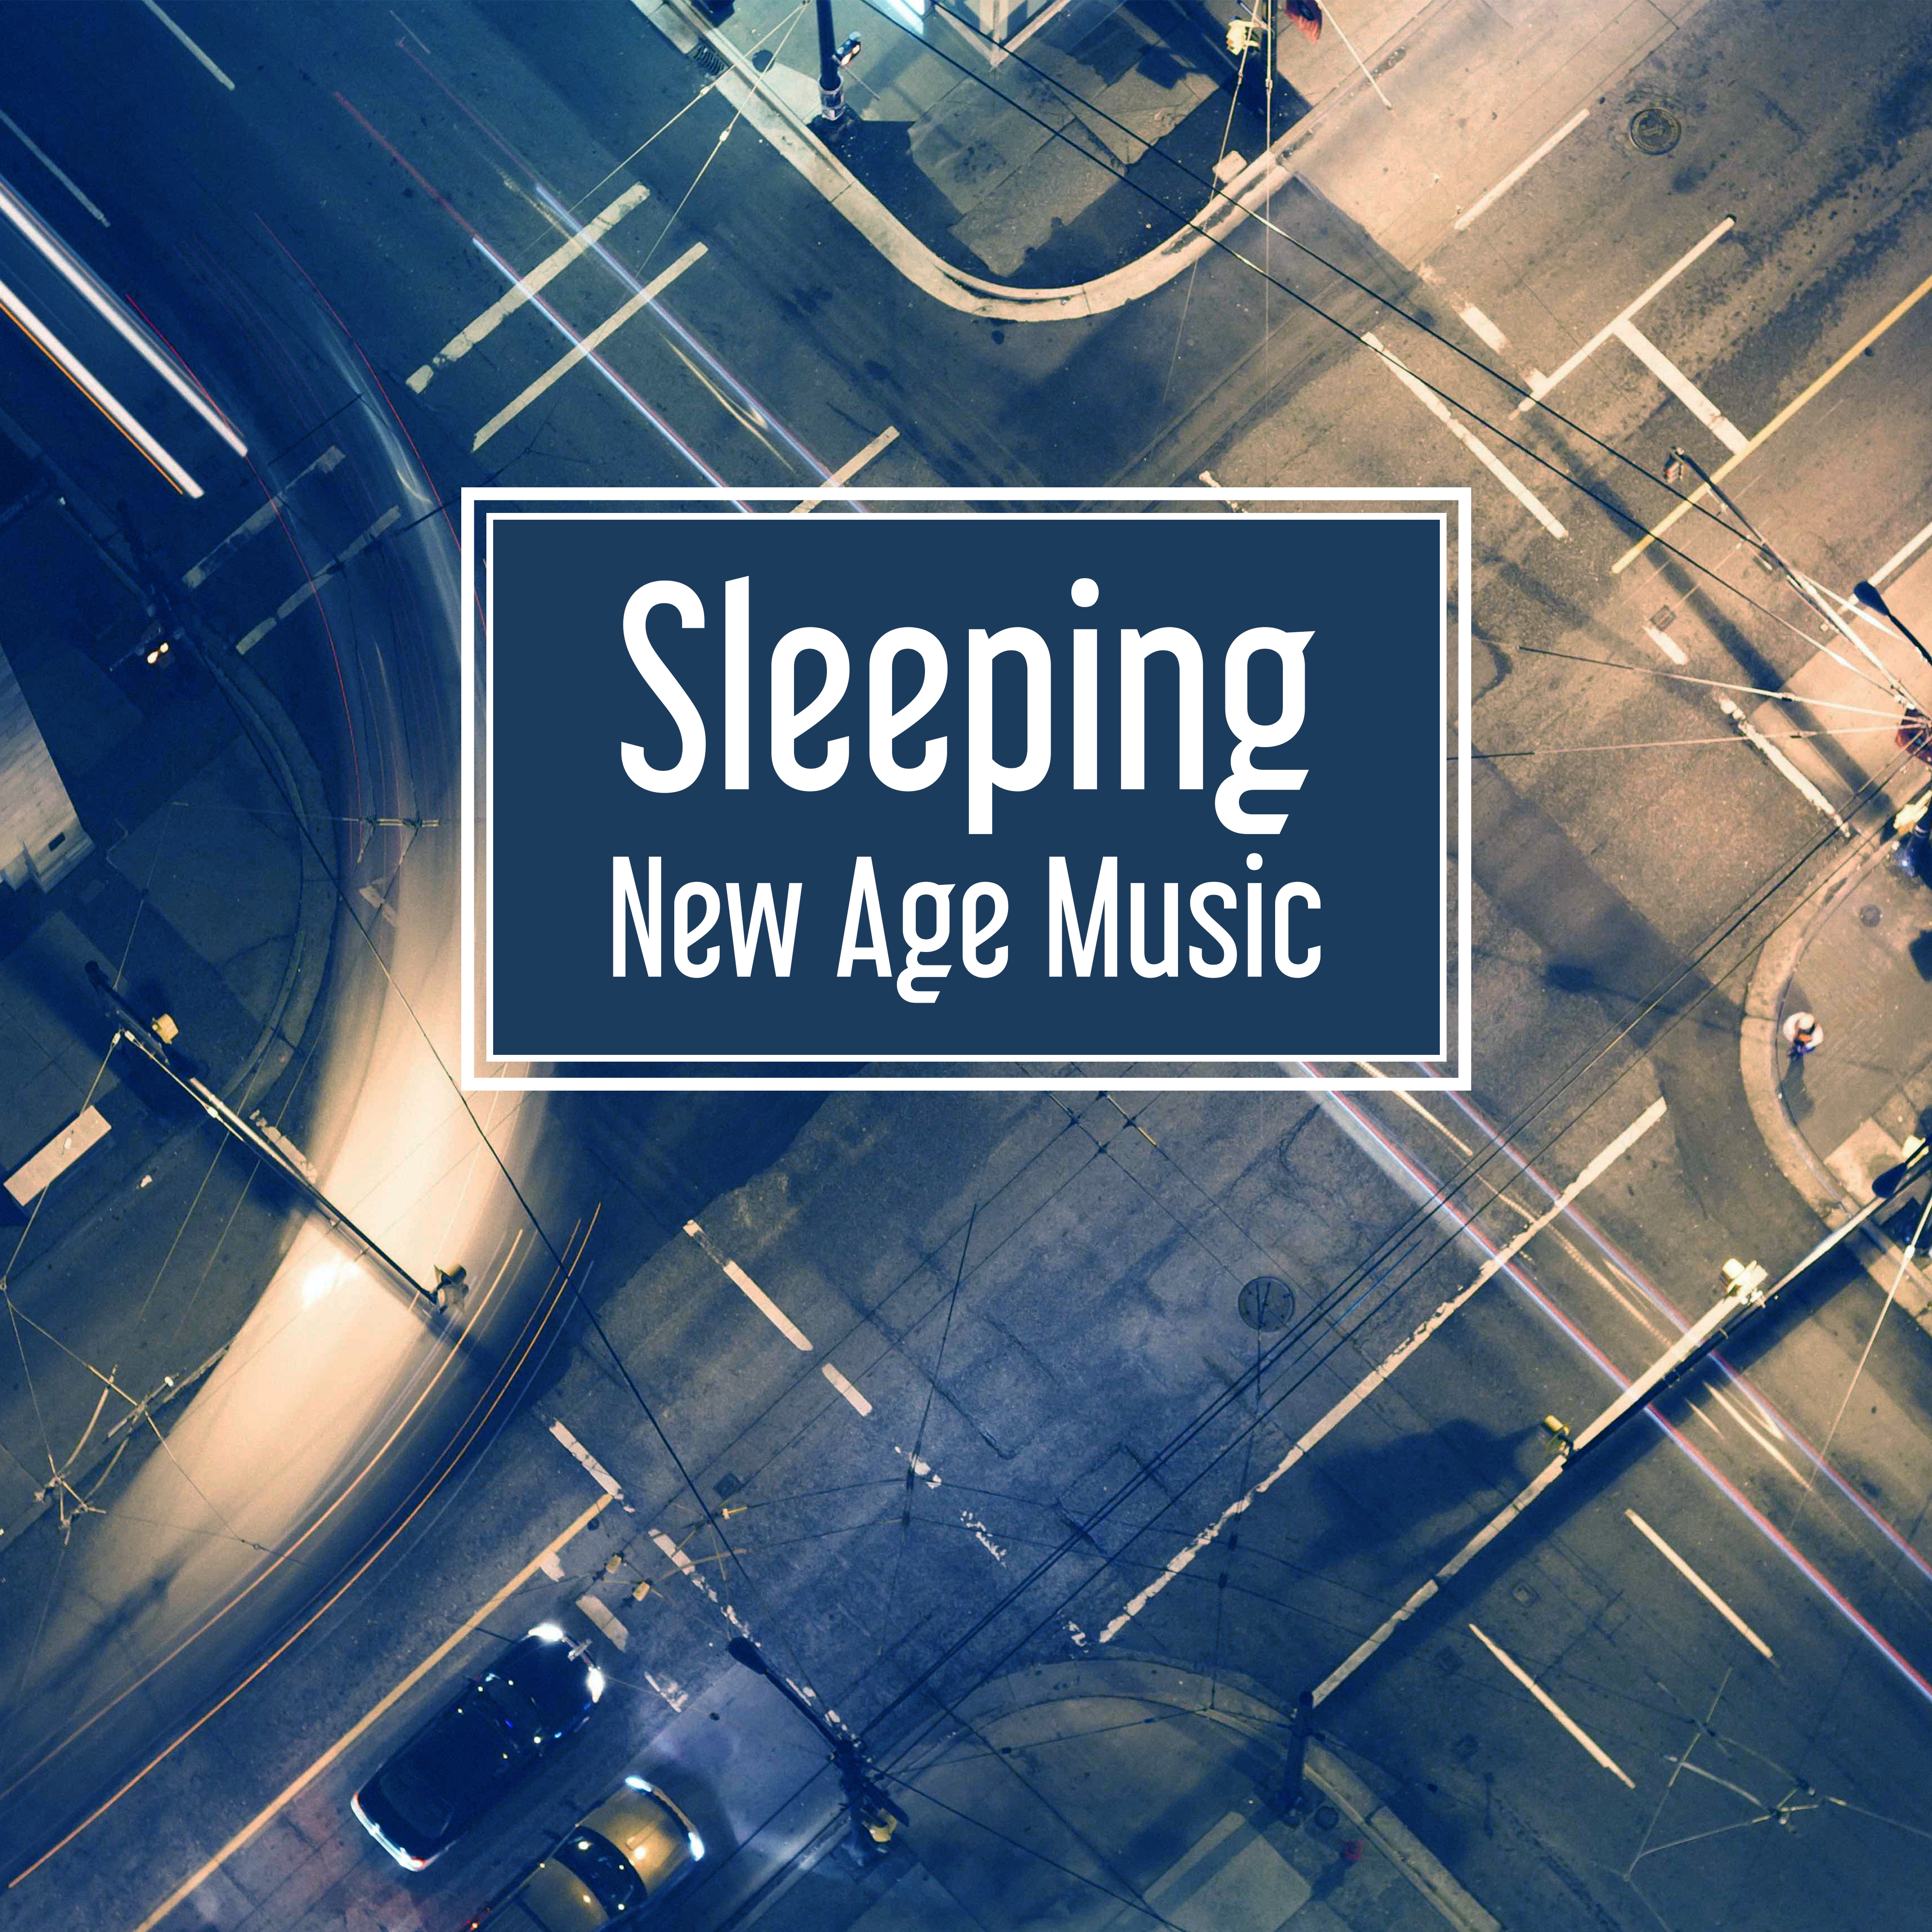 Sleeping New Age Music  Calming Nature Waves, Soothing Music to Sleep, Restful Night, New Age Calmness